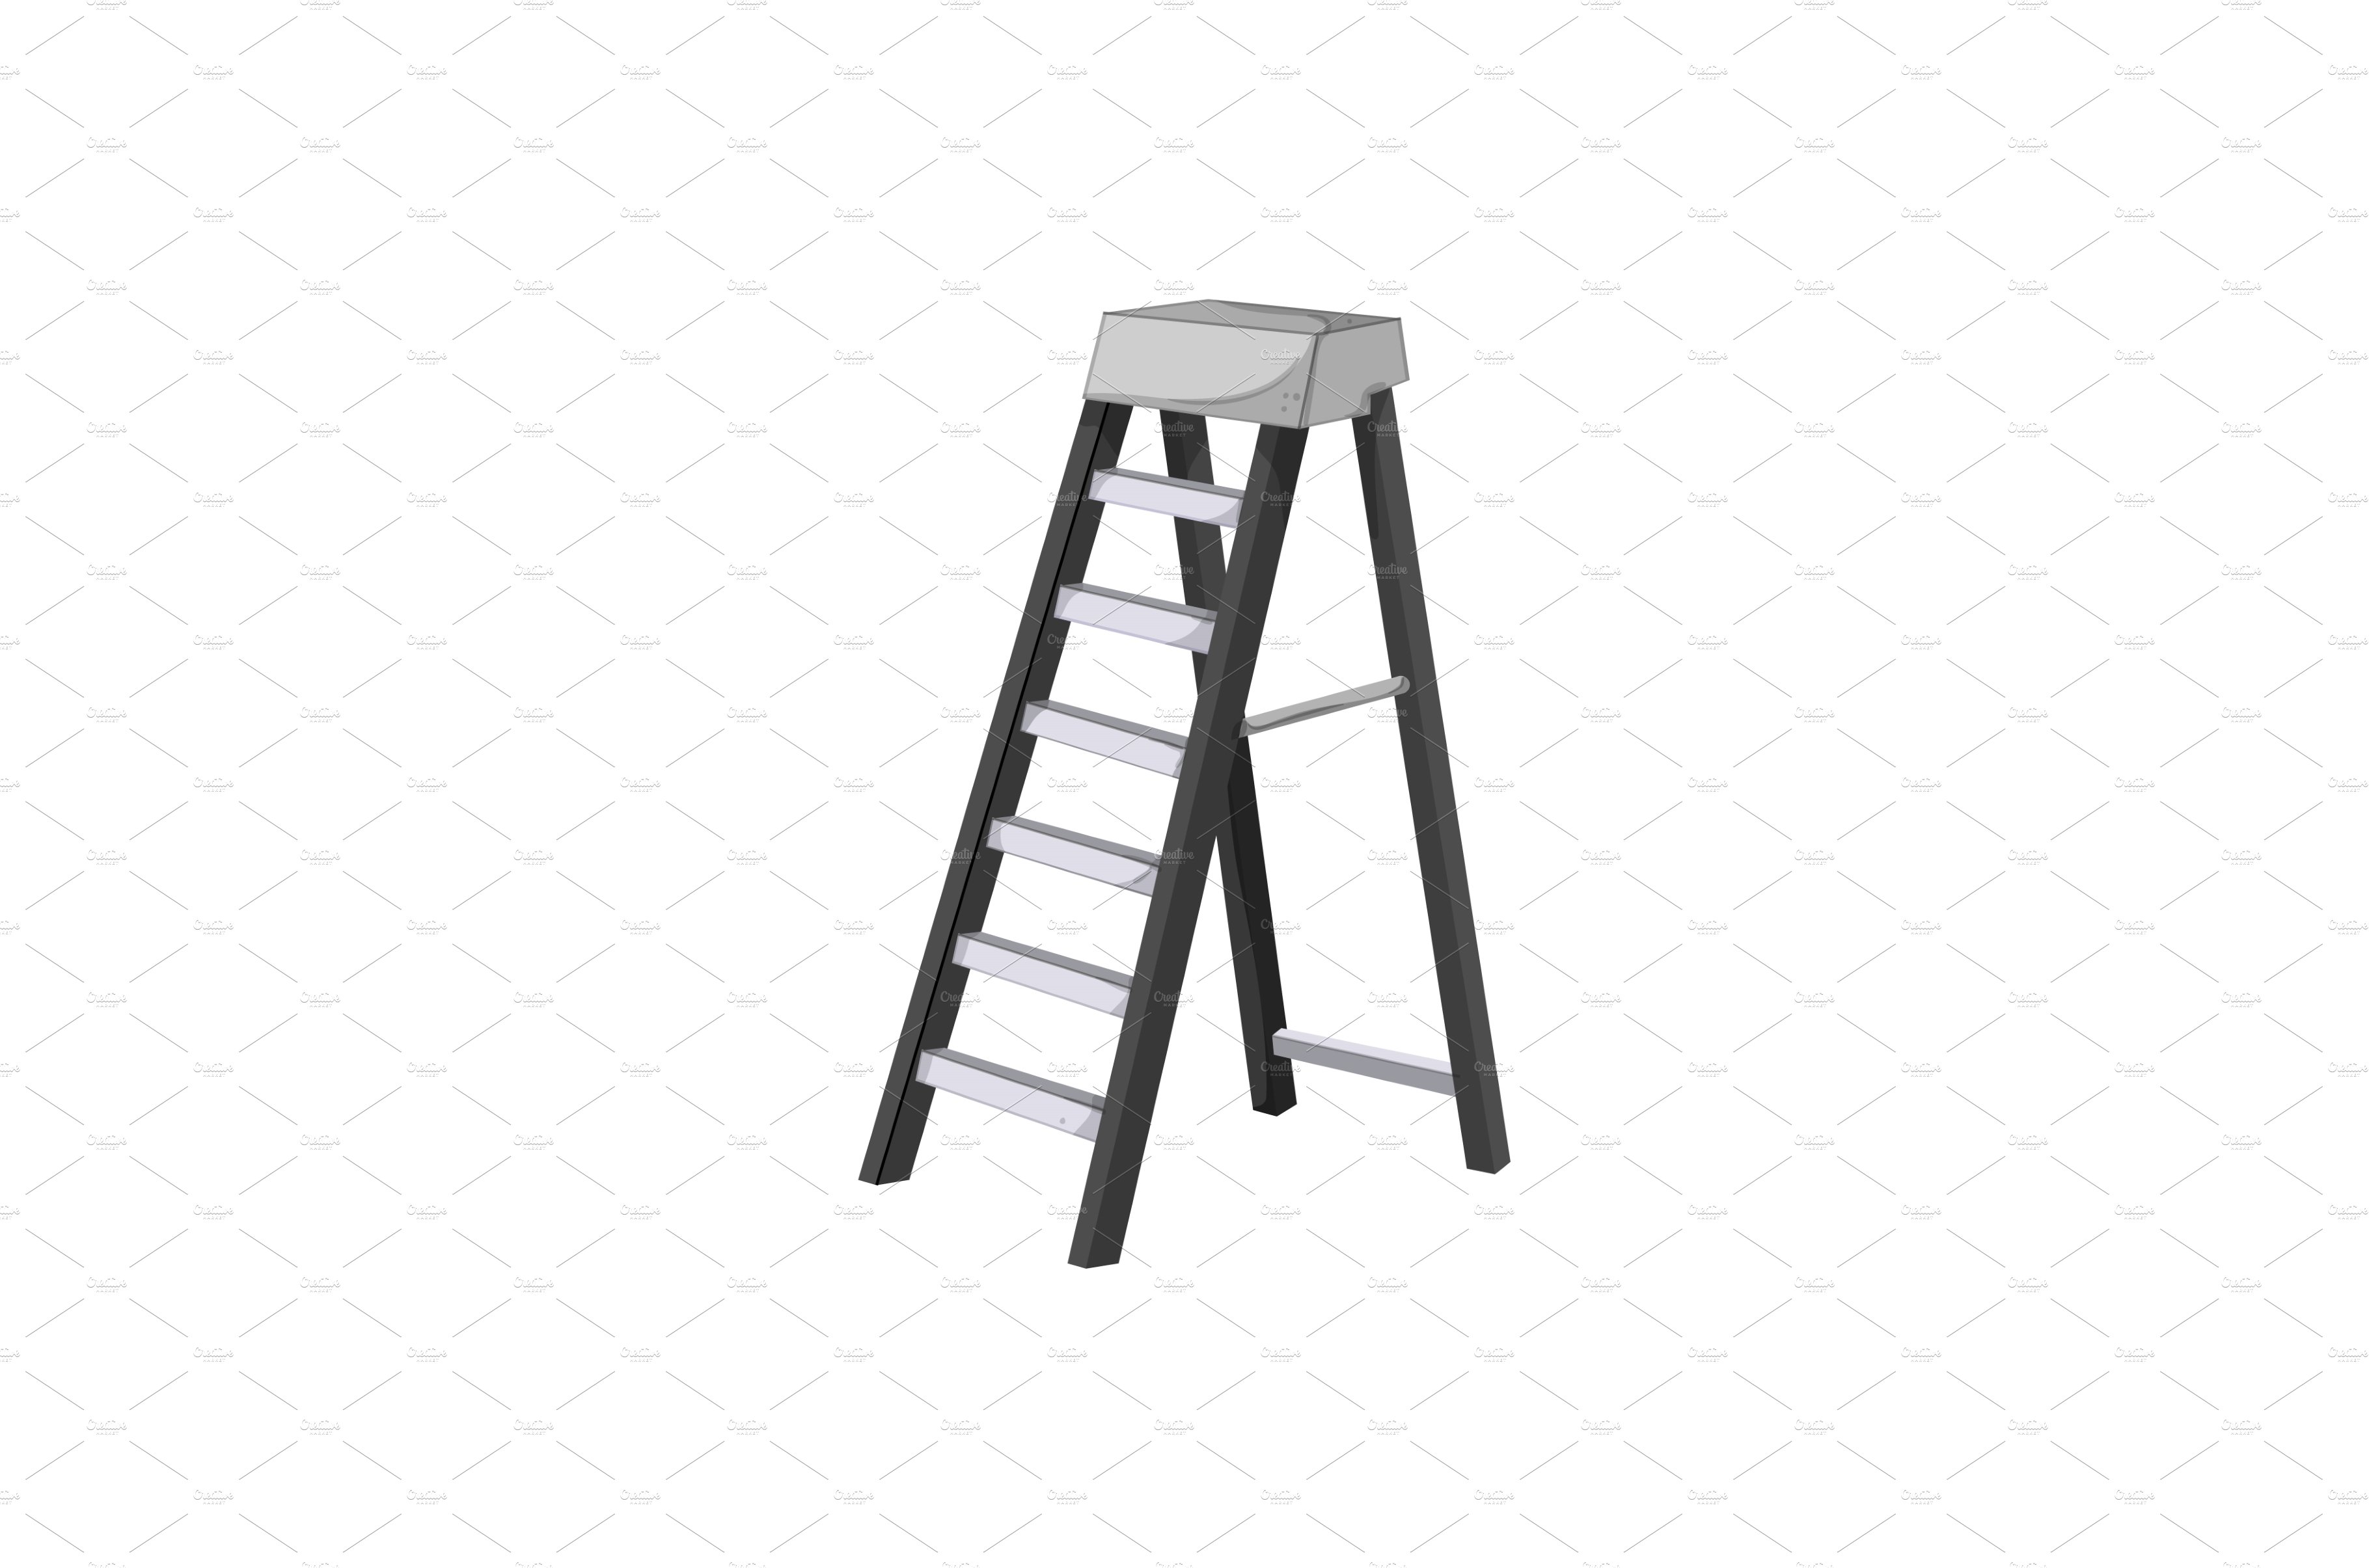 safety step ladder safety cartoon cover image.